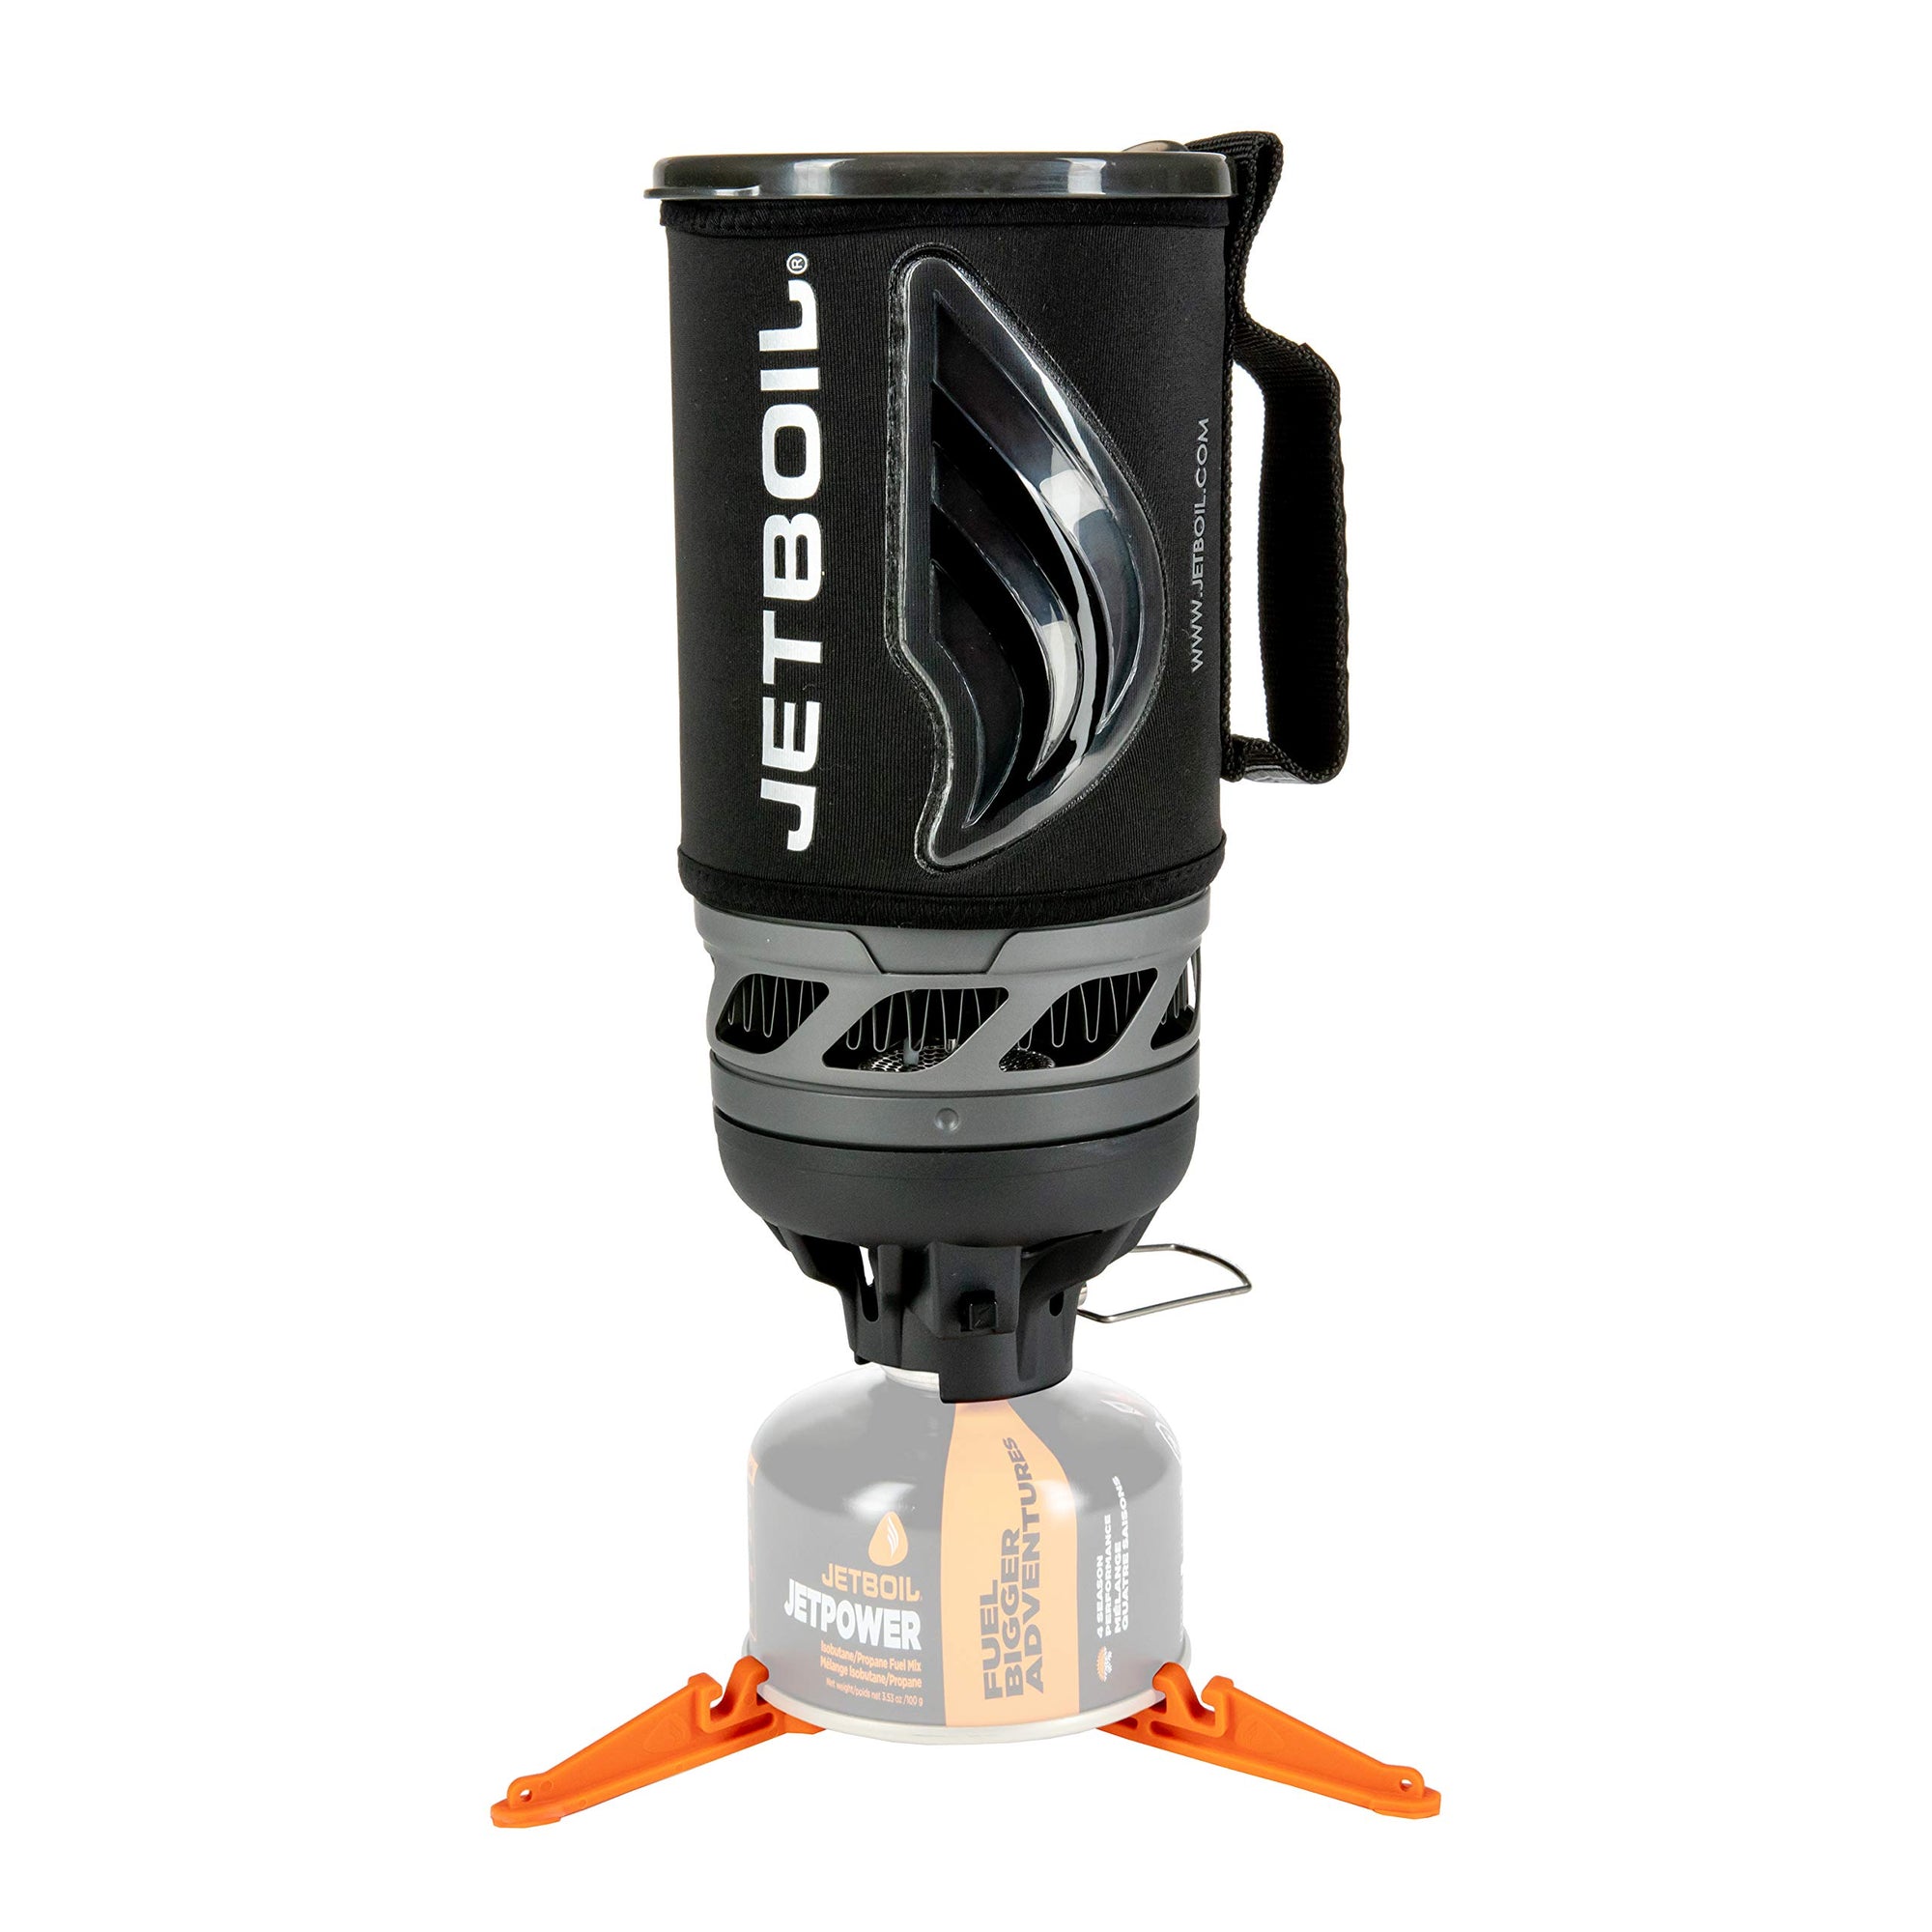 Jetboil Flash Camping Stove Cooking System, Carbon